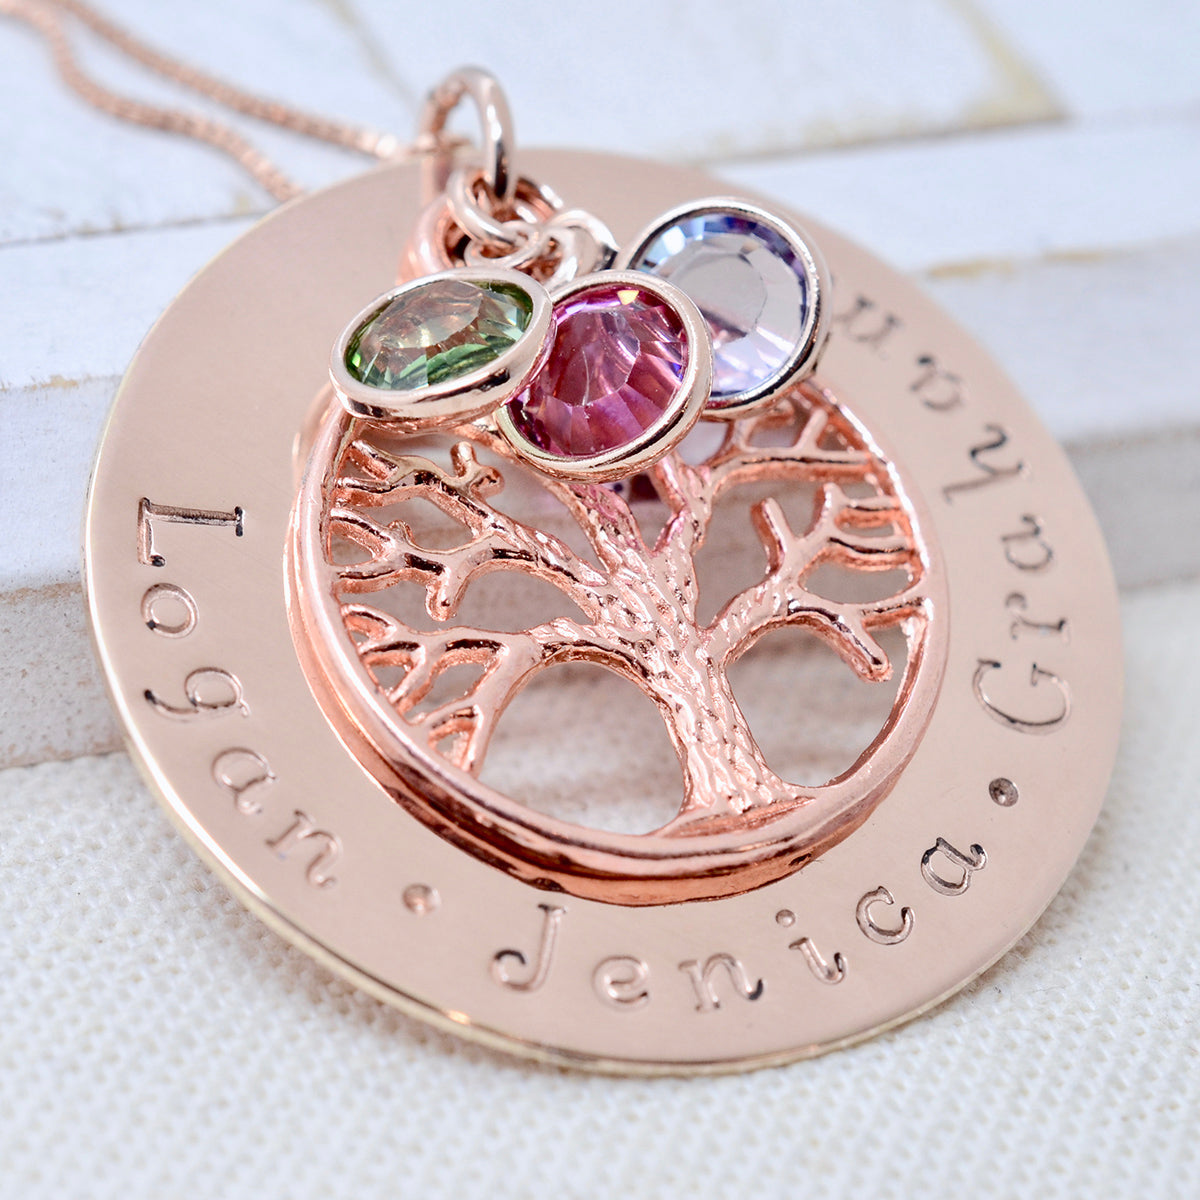 Family Tree Necklace - Rose Gold - Love It Personalized